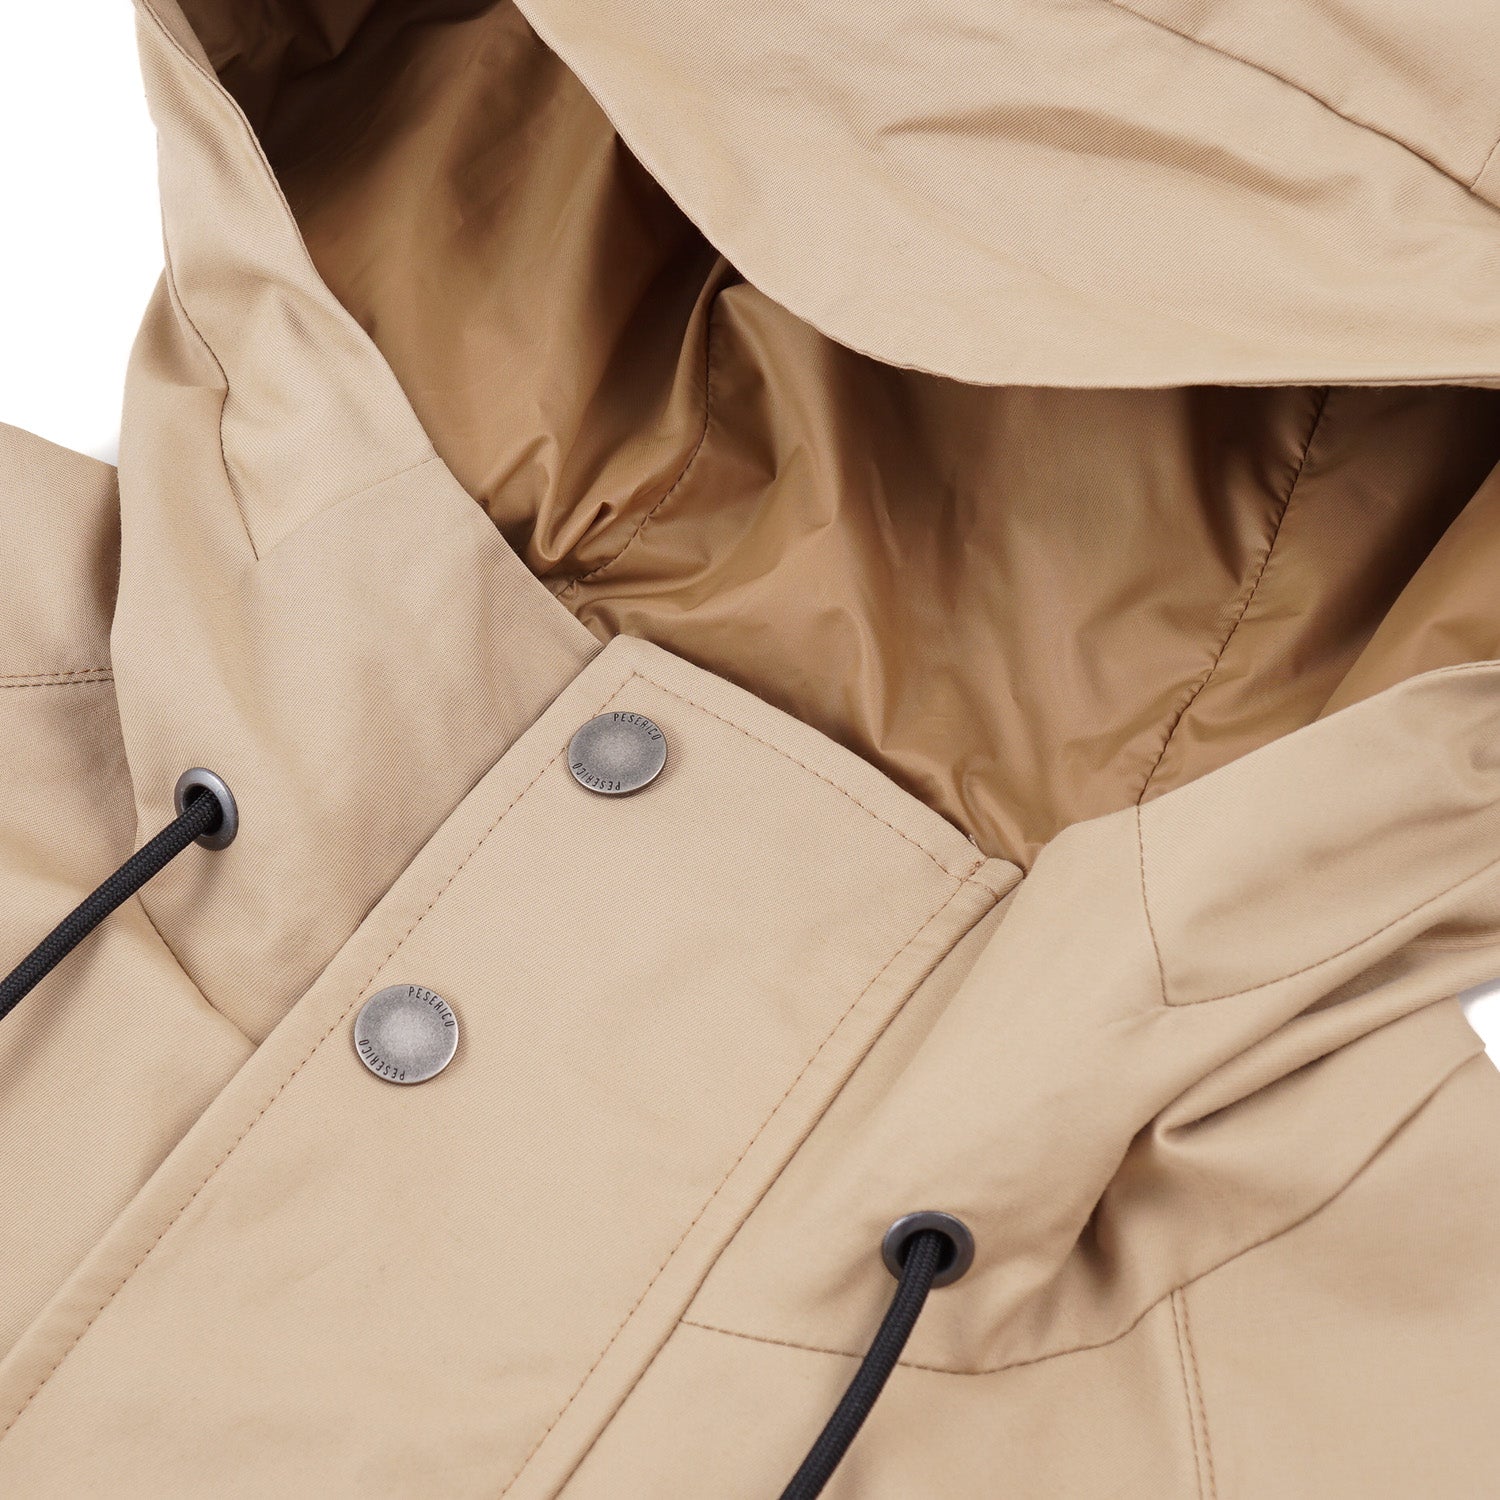 Peserico Weather-Repellent Hooded Parka - Top Shelf Apparel